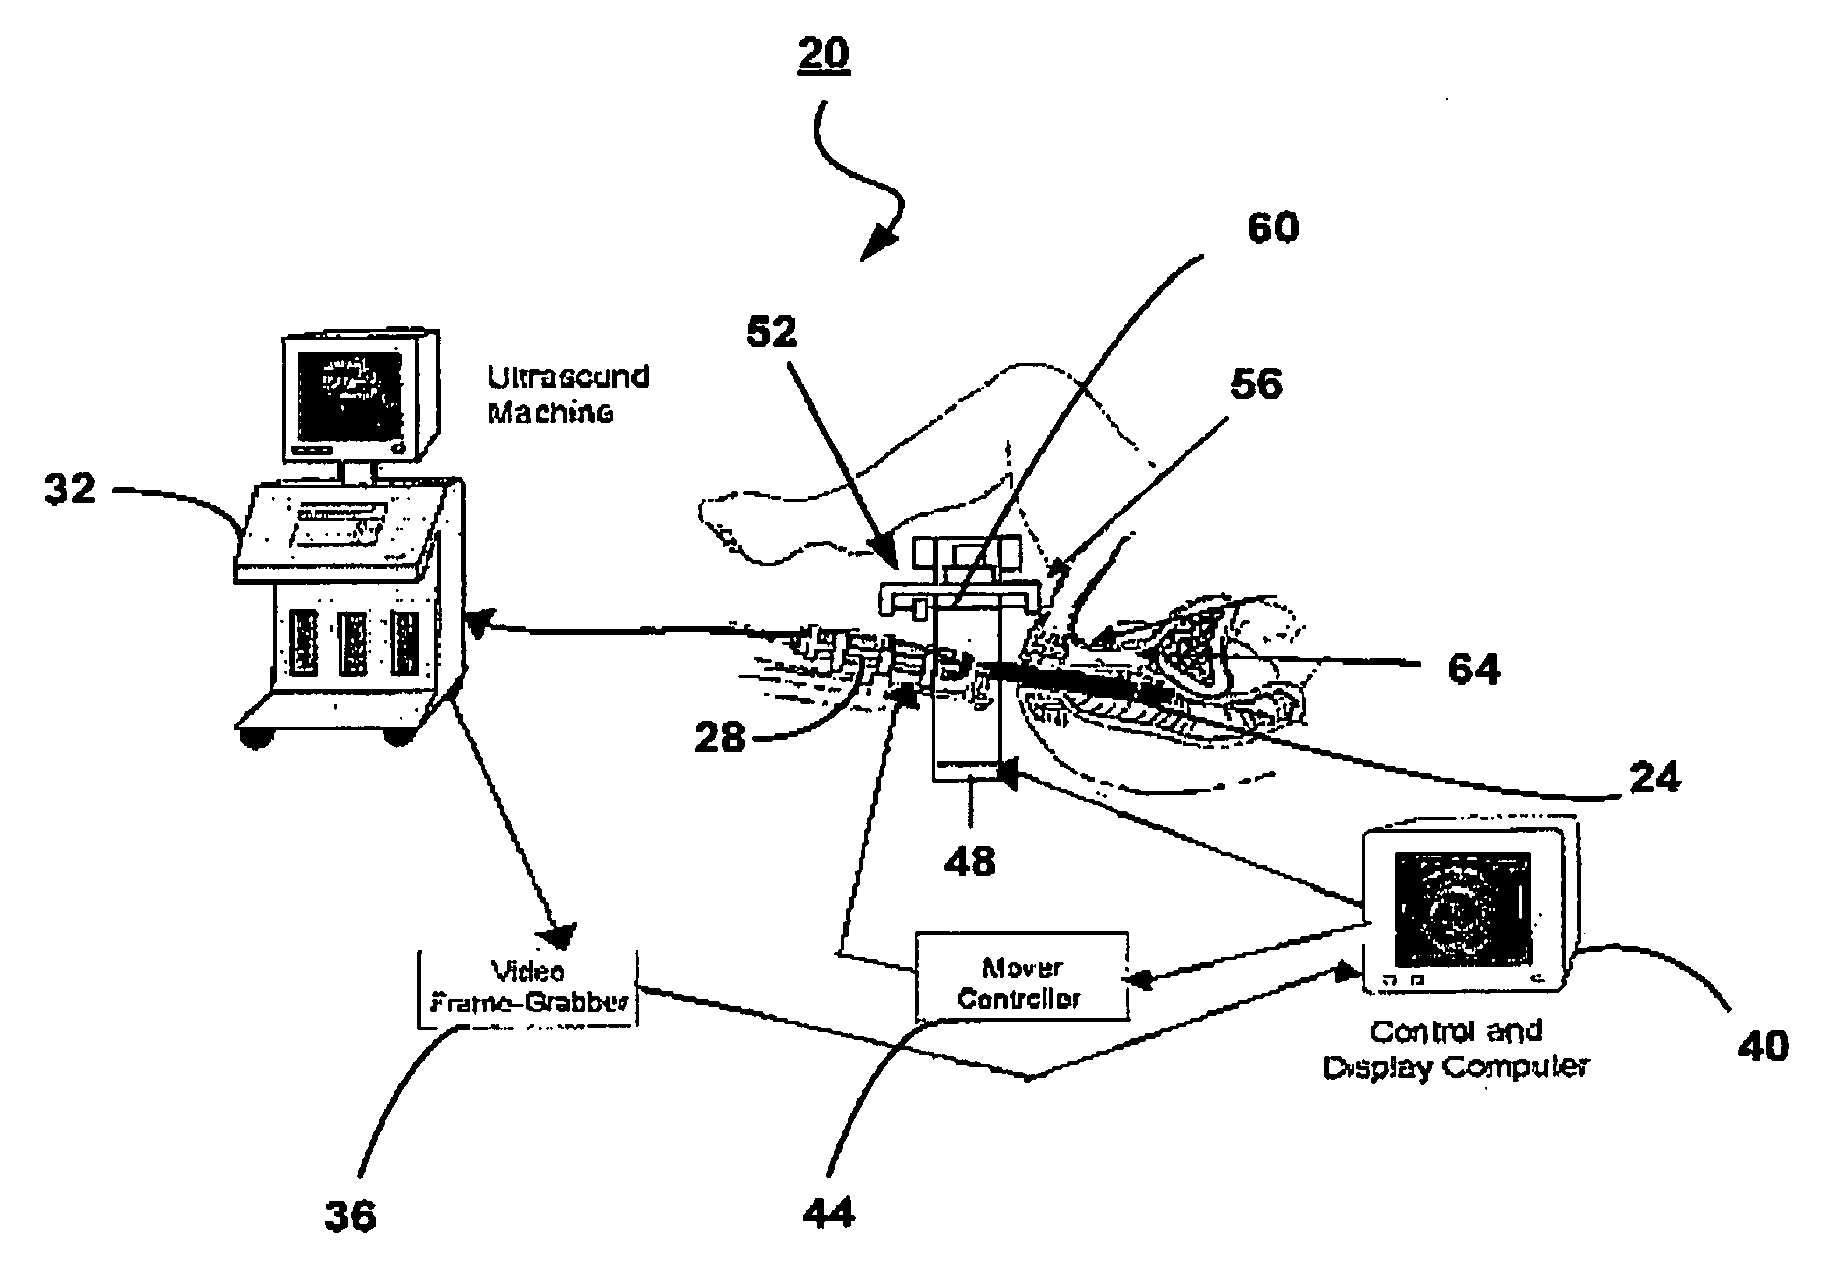 Apparatus and computing device for performing brachytherapy and methods of imaging using the same